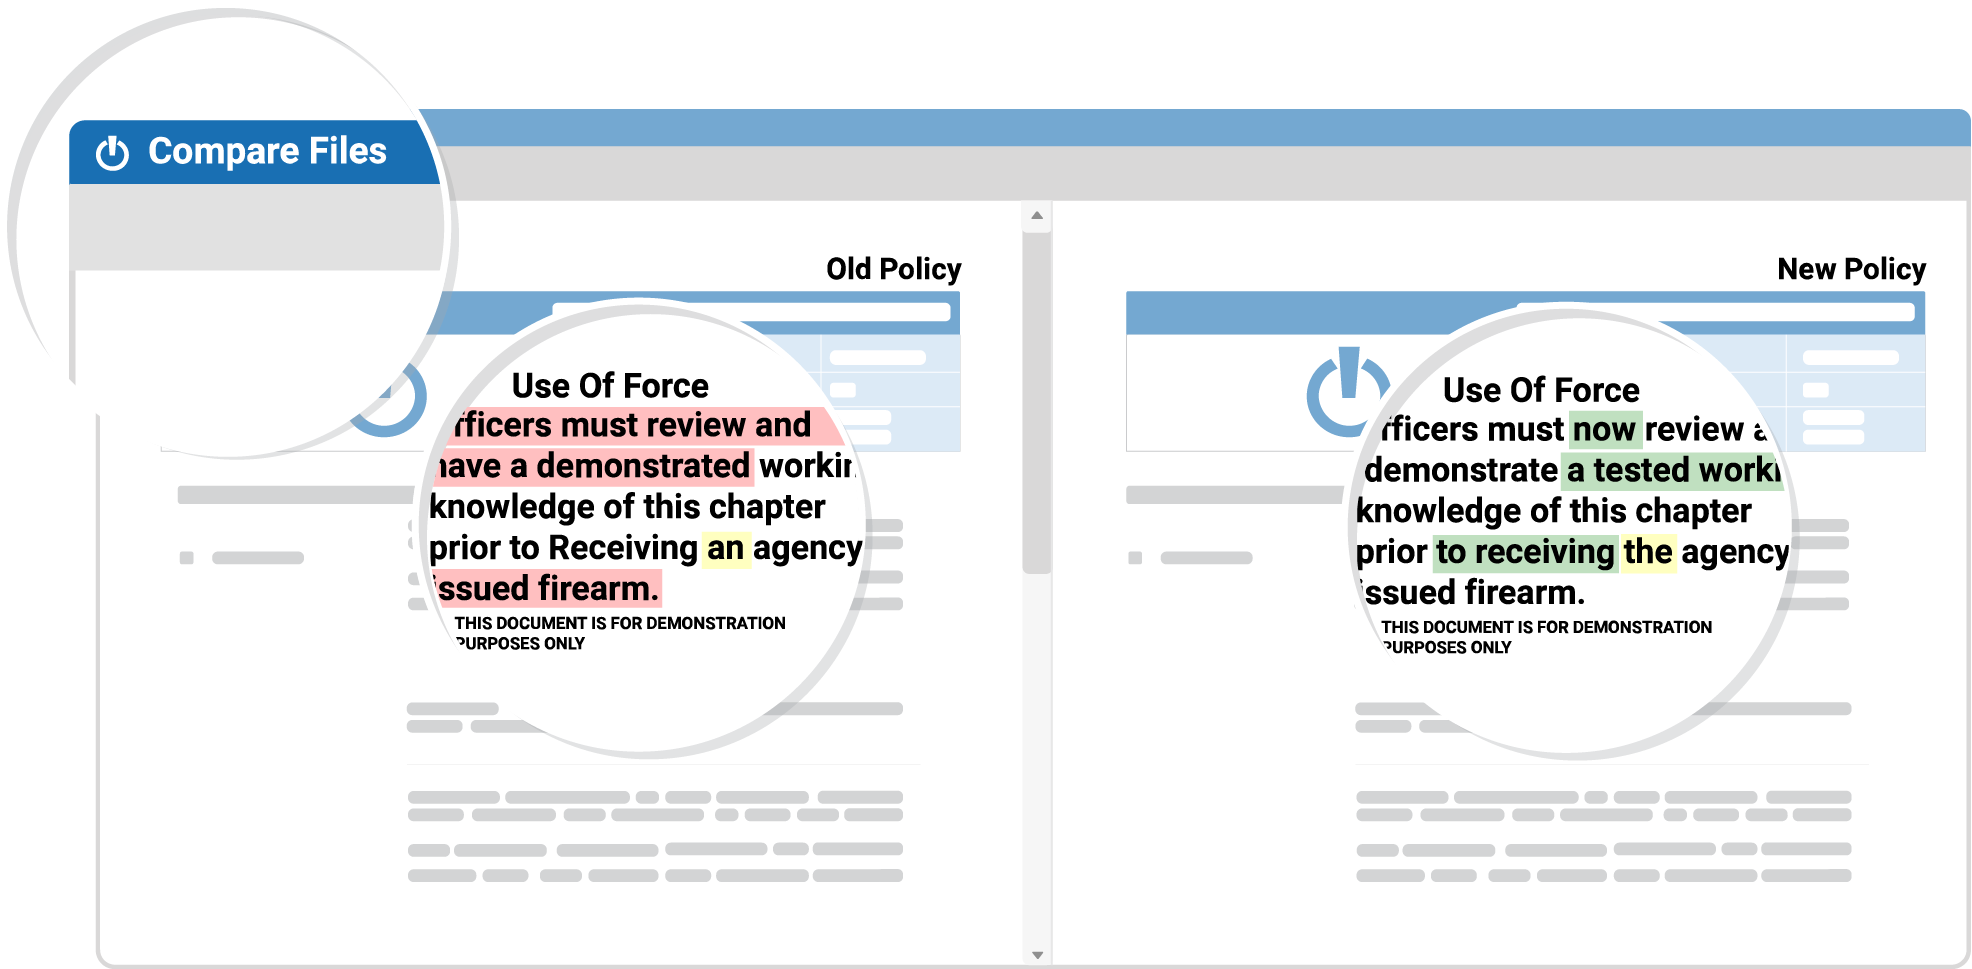 Easily review and approve changes to critical documents with side-by-side, color-coded highlighting of everything that has been added, deleted, or revised.